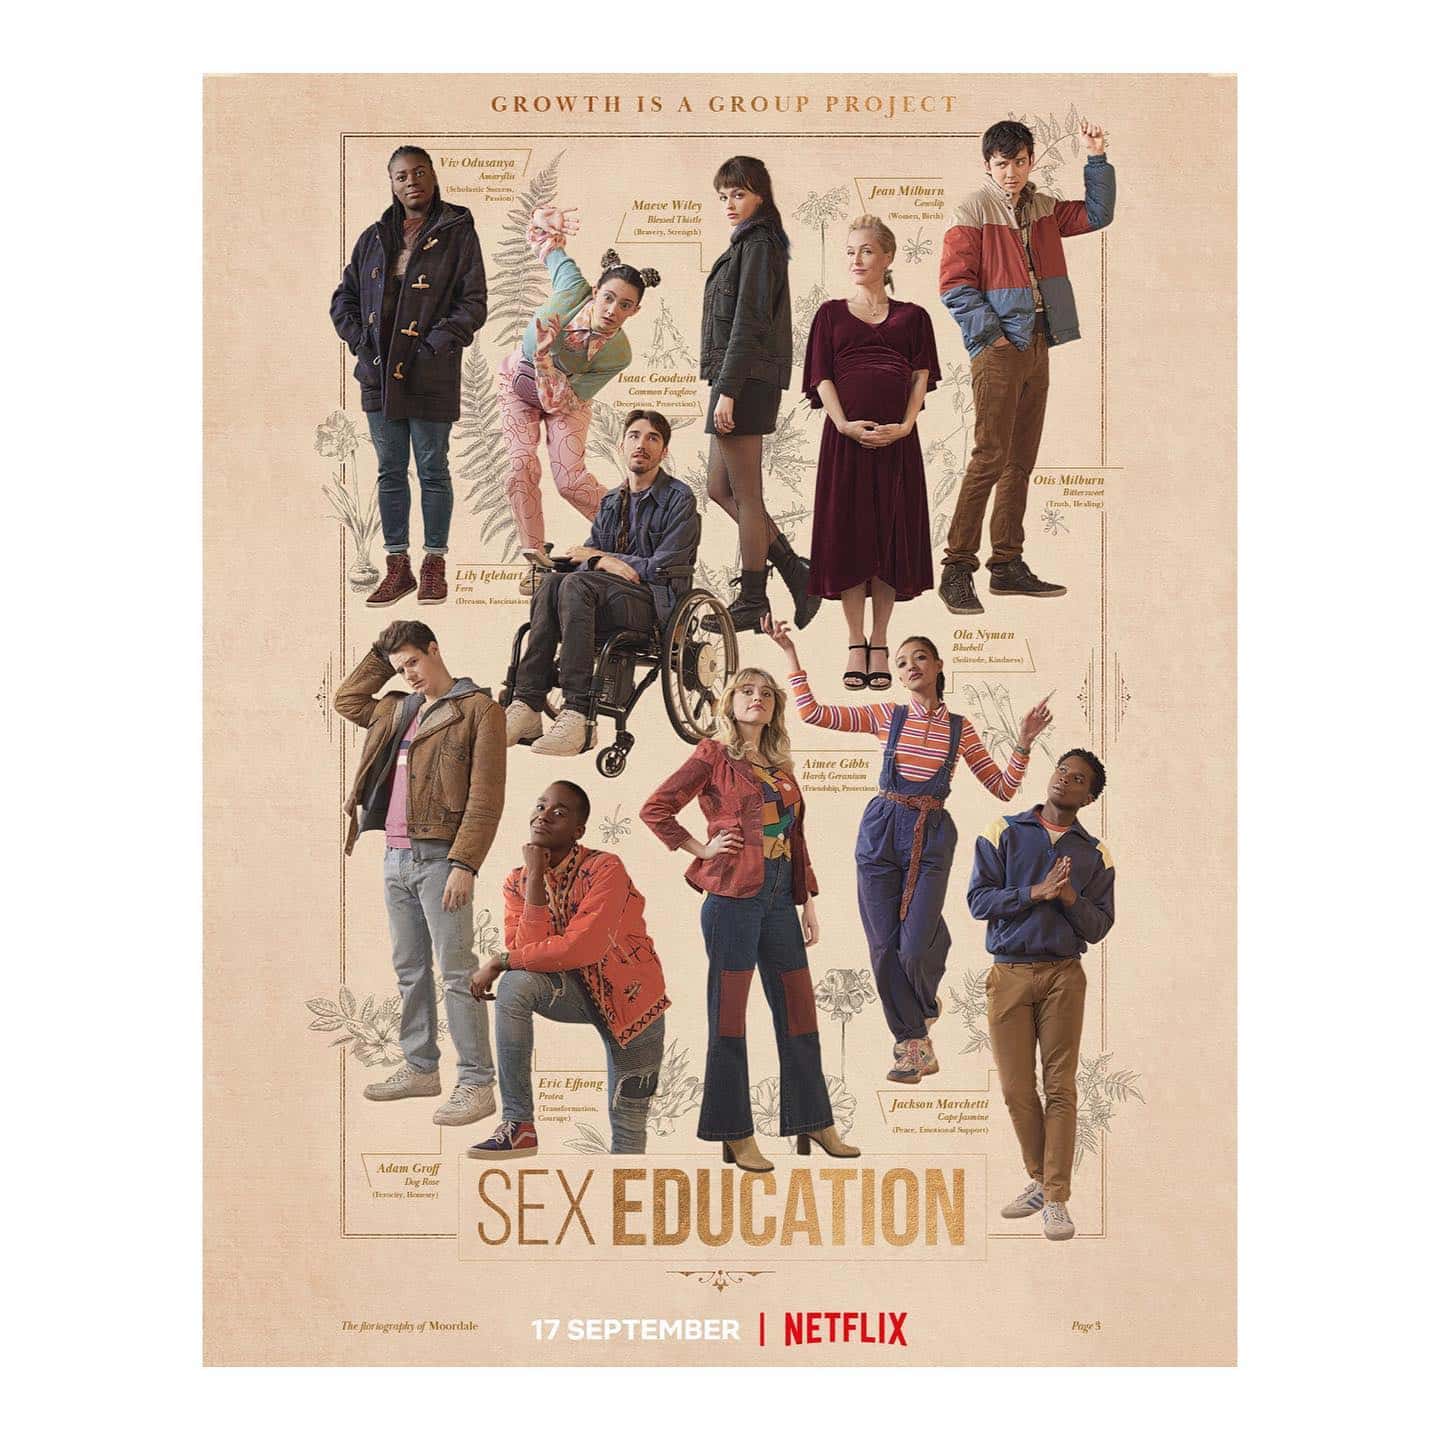 Growth is a group project. Sex Education returns on 17th September, only on @netflixuk 
.
.
.